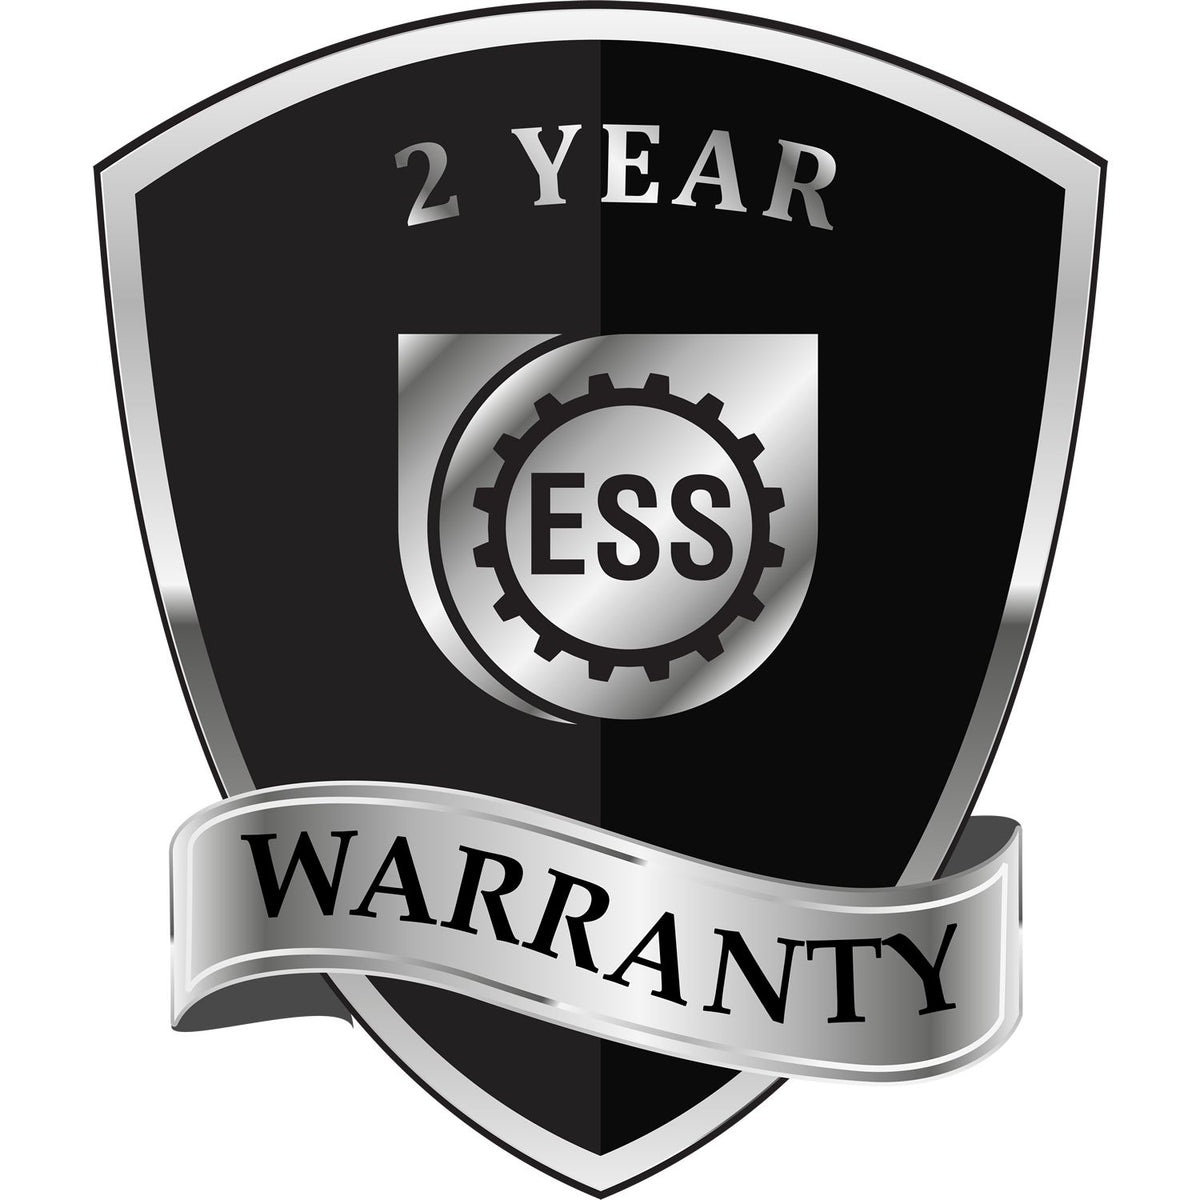 A black and silver badge or emblem showing warranty information for the Heavy Duty Cast Iron Maine Geologist Seal Embosser